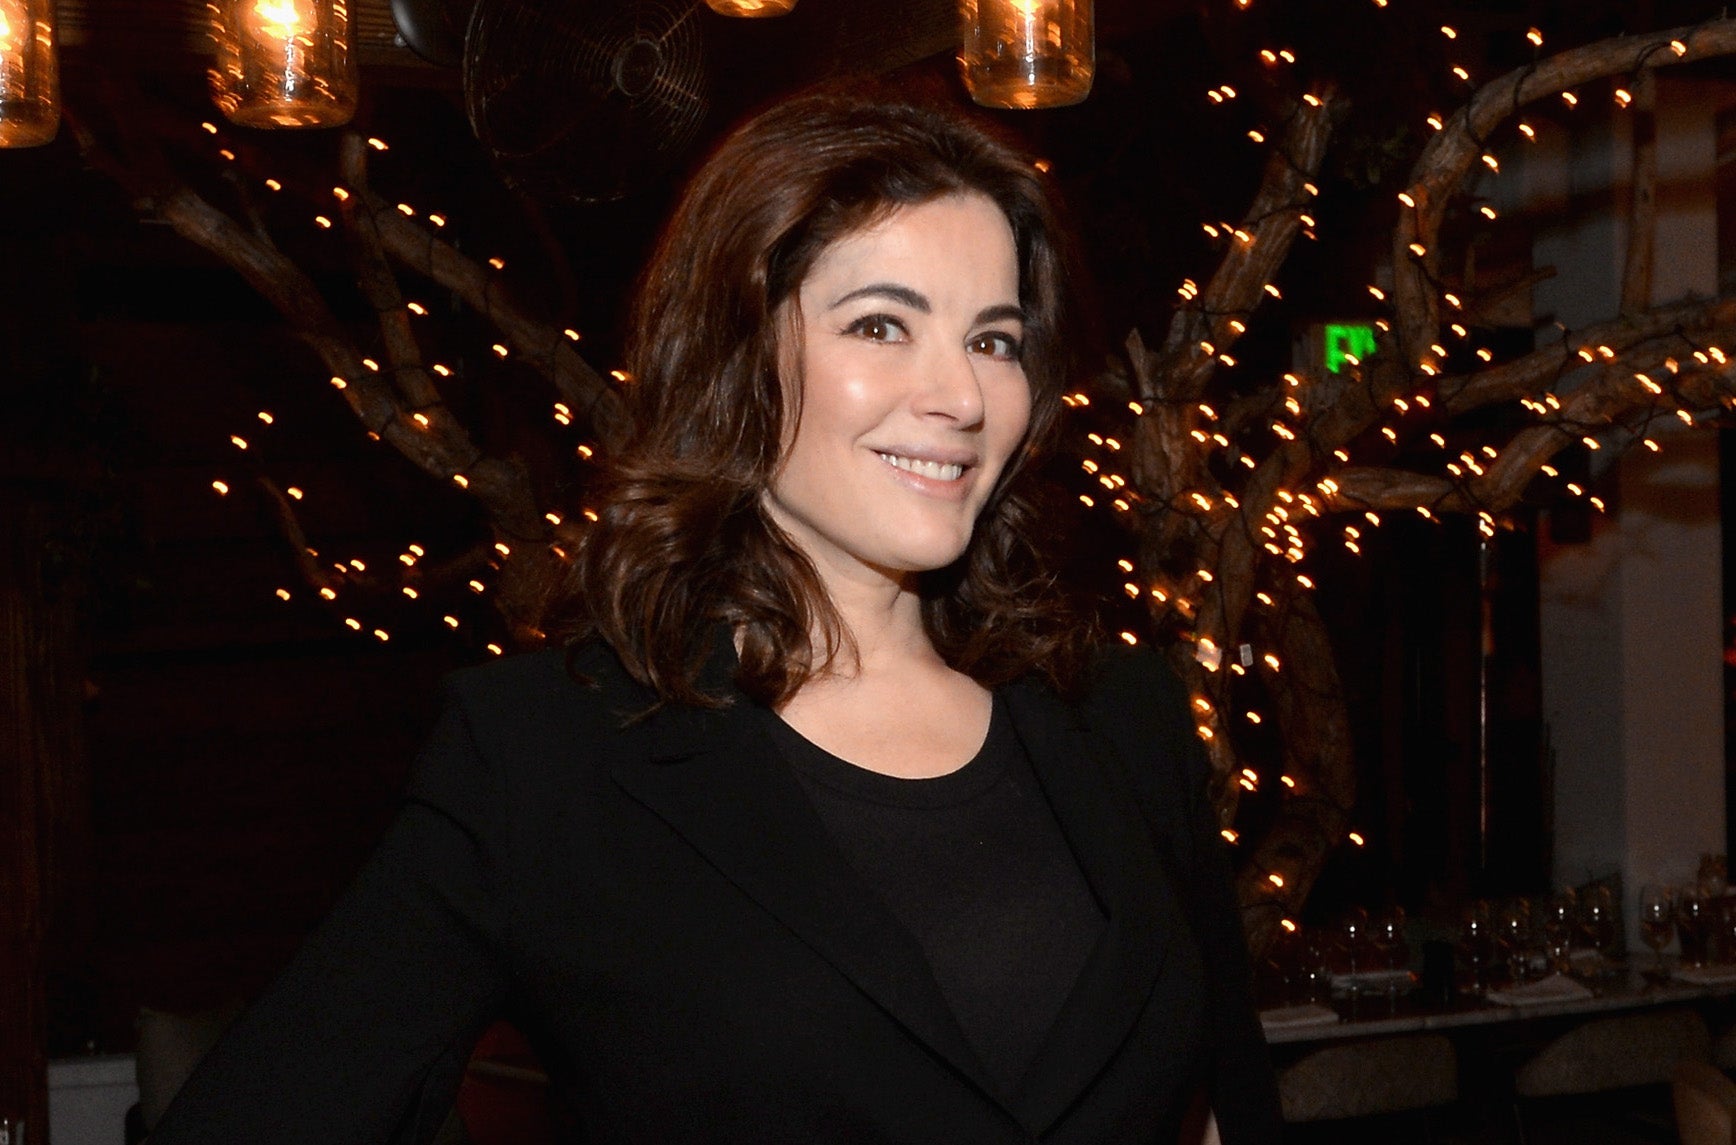 Celebrity chef Nigella Lawson has sent the Internet wild over the way she says 'microwave’